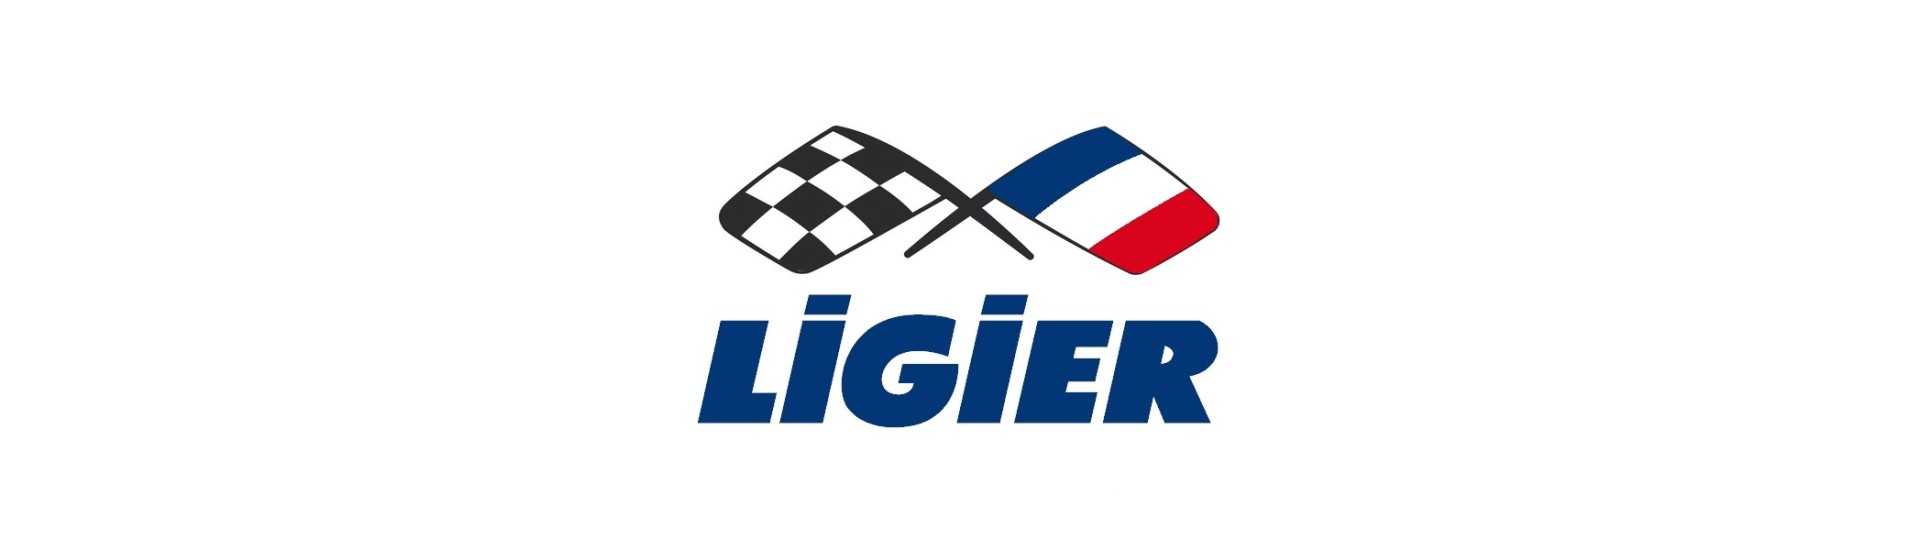 Dashboard at best price for car without a permit Ligier